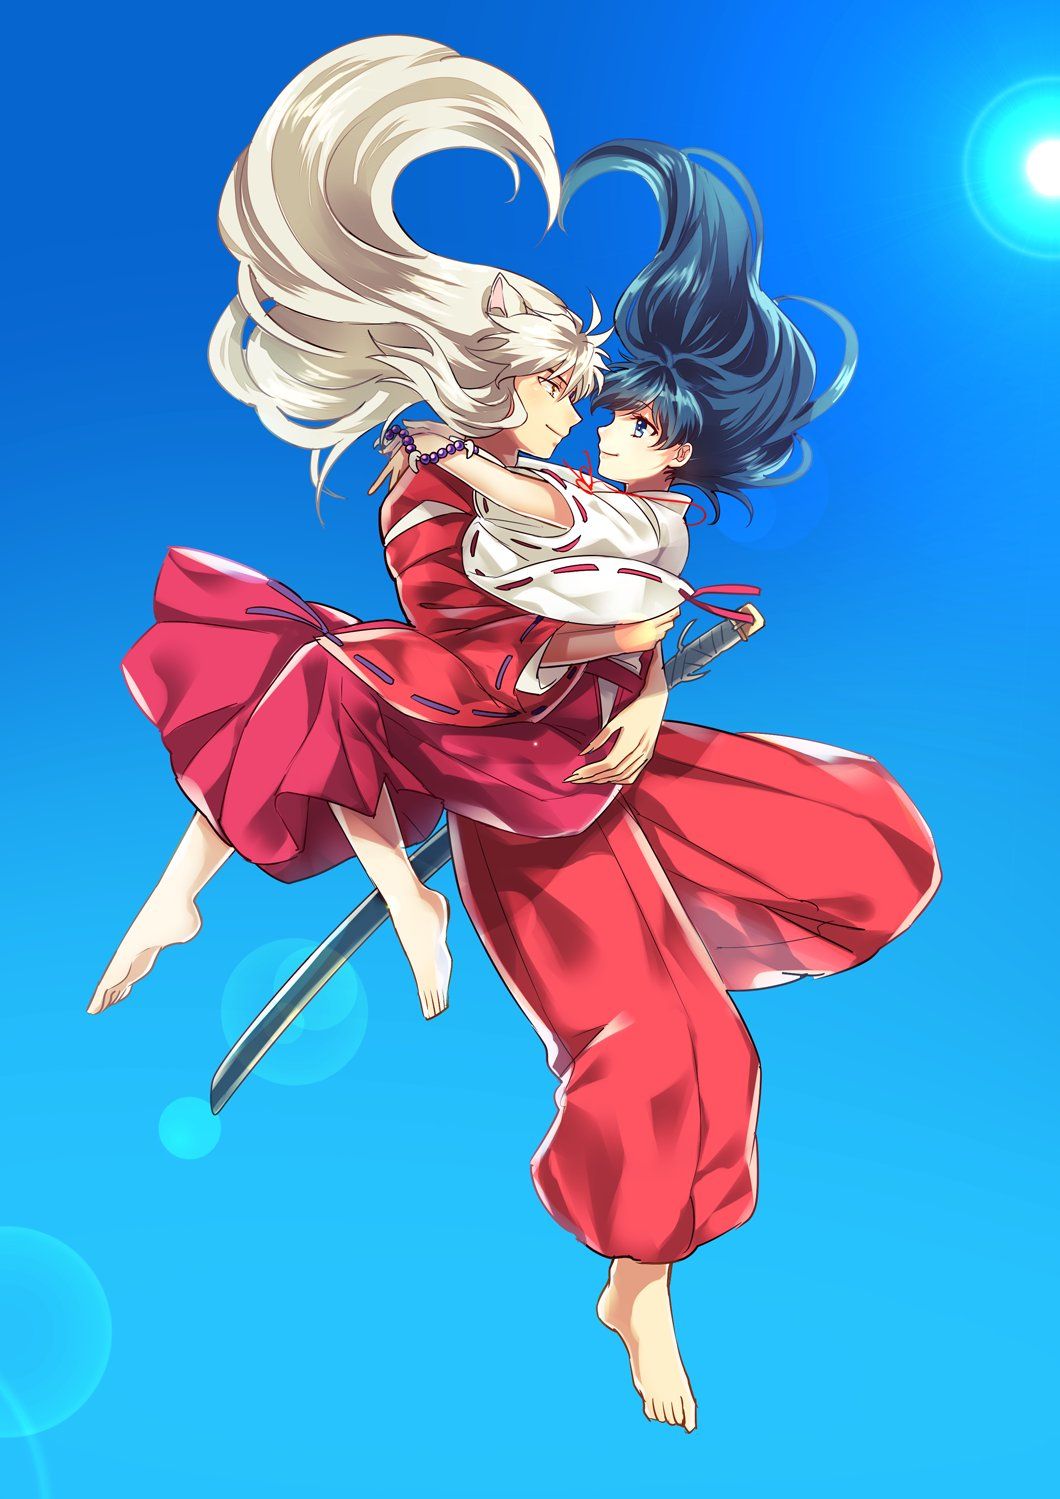 Inuyasha Wallpapers  Top 20 Best Inuyasha Wallpapers  HQ 